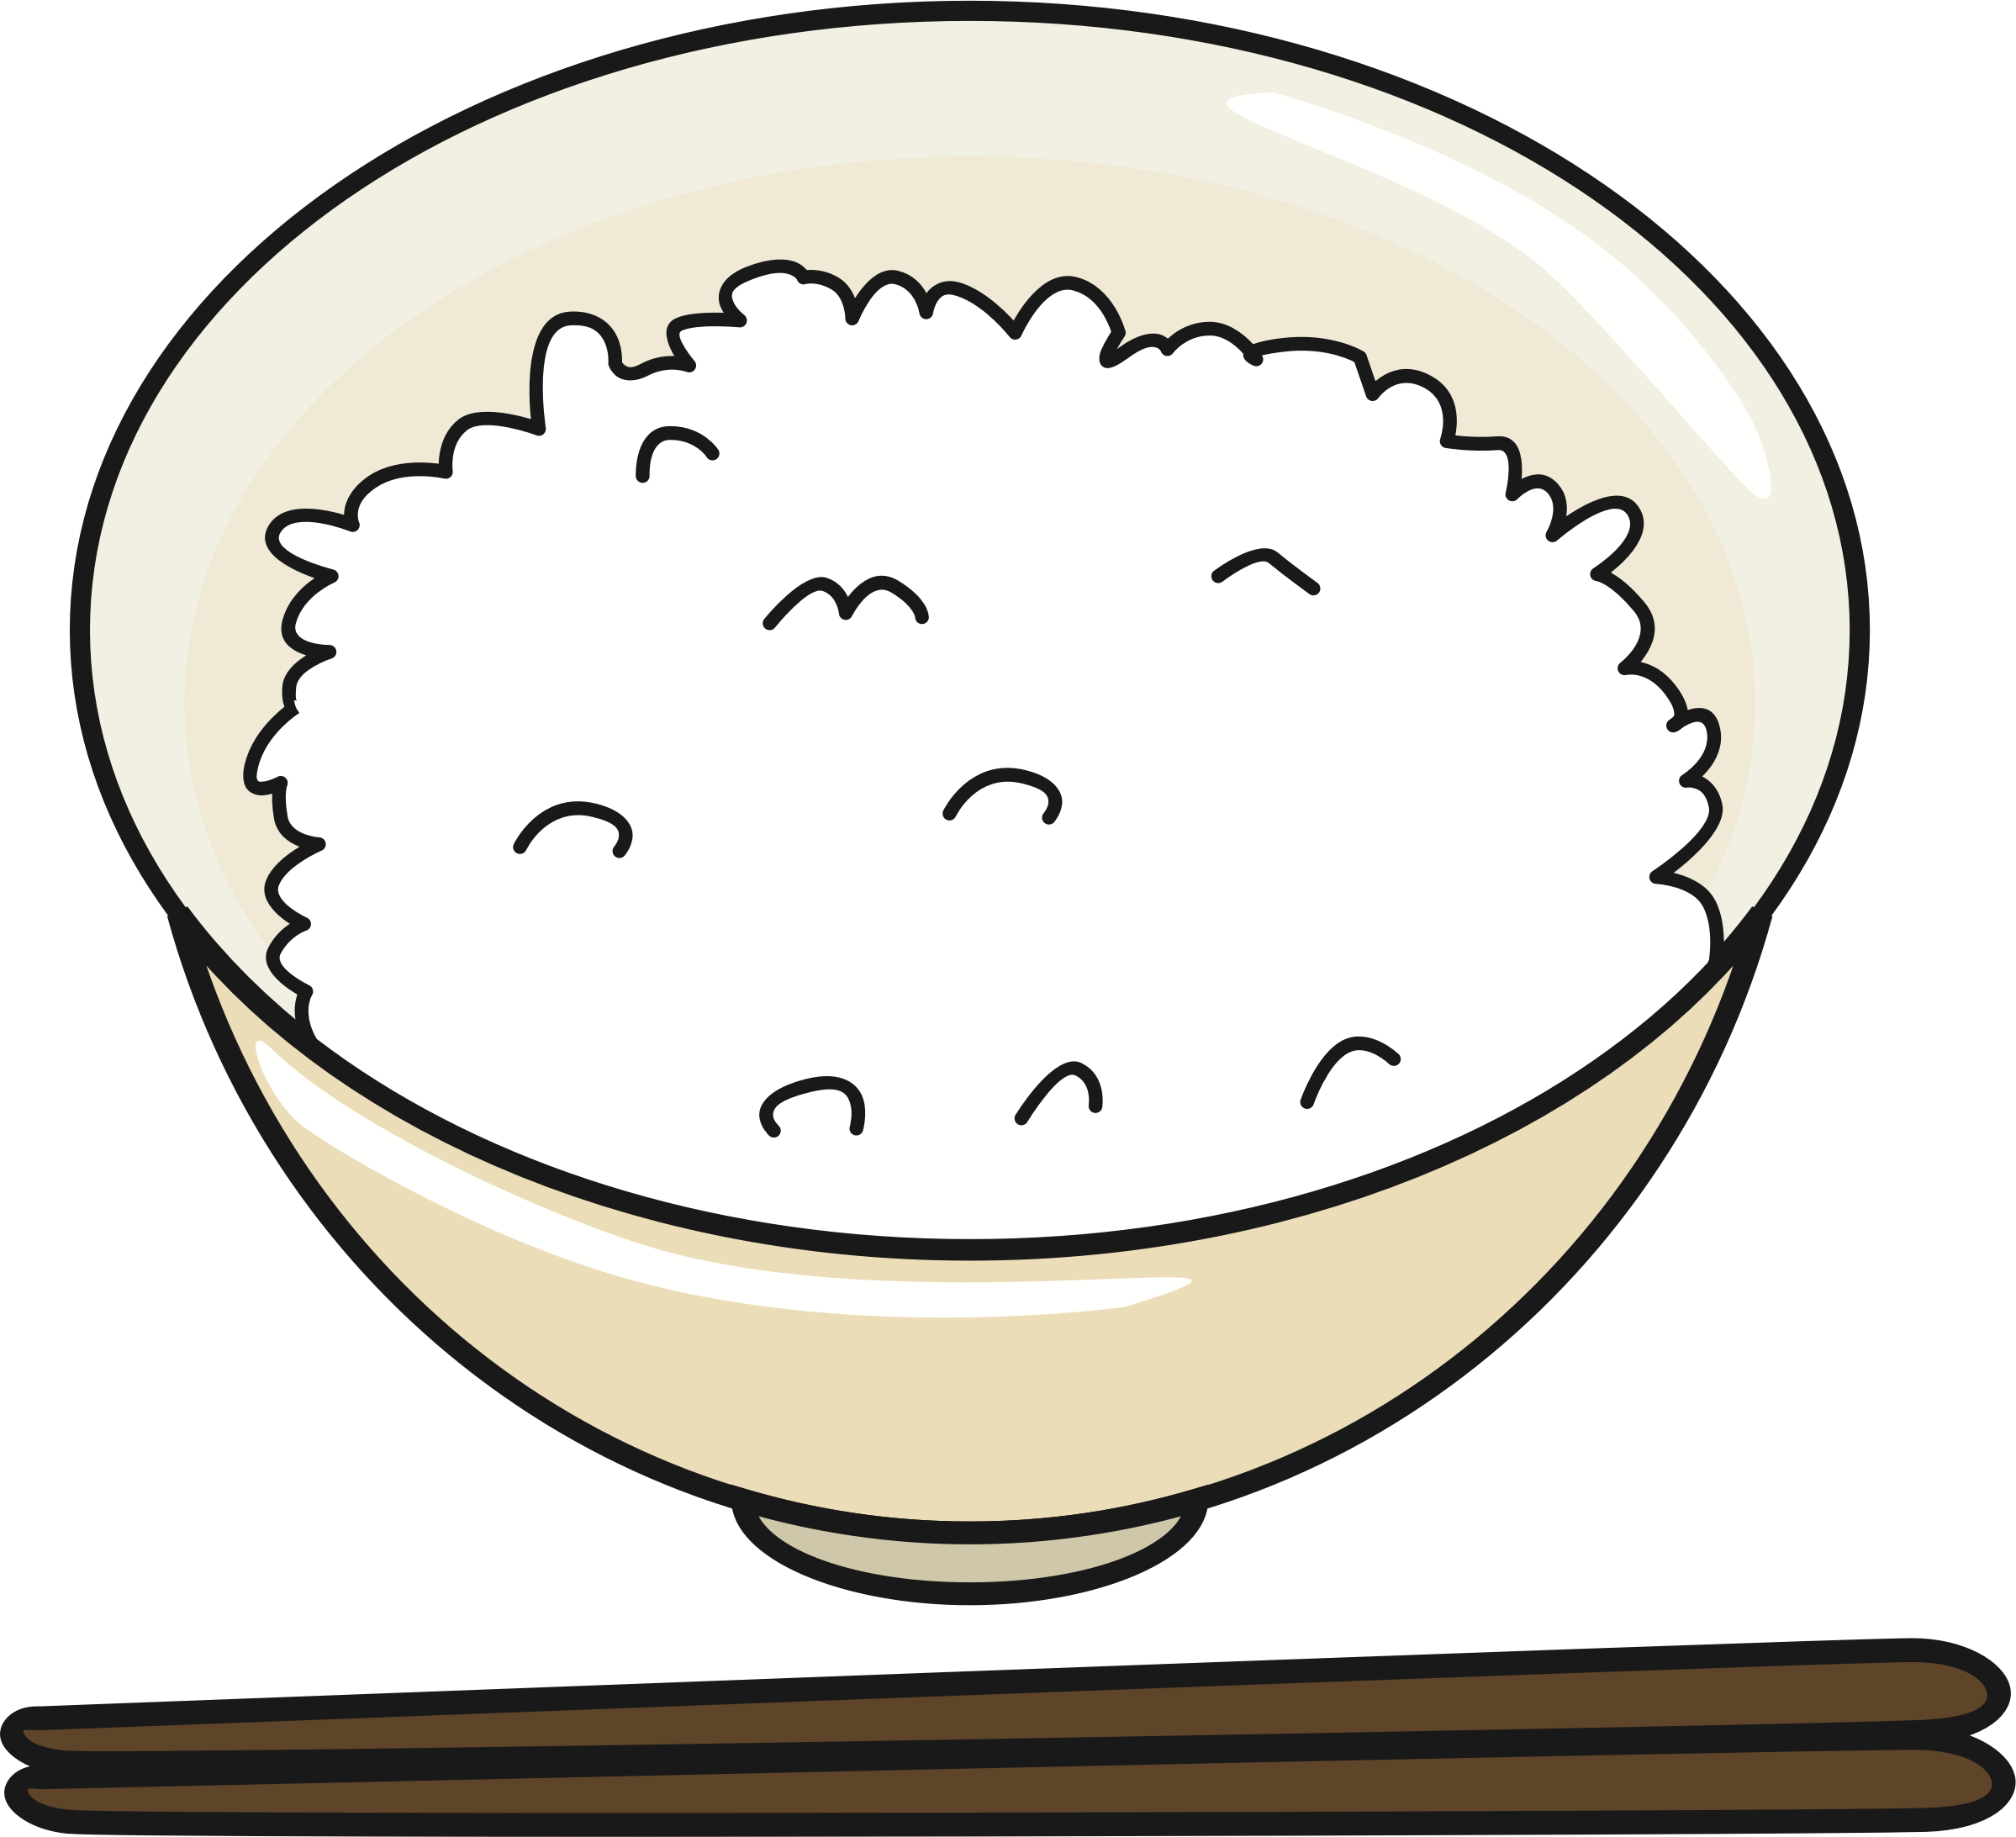 clipart of rice - photo #25